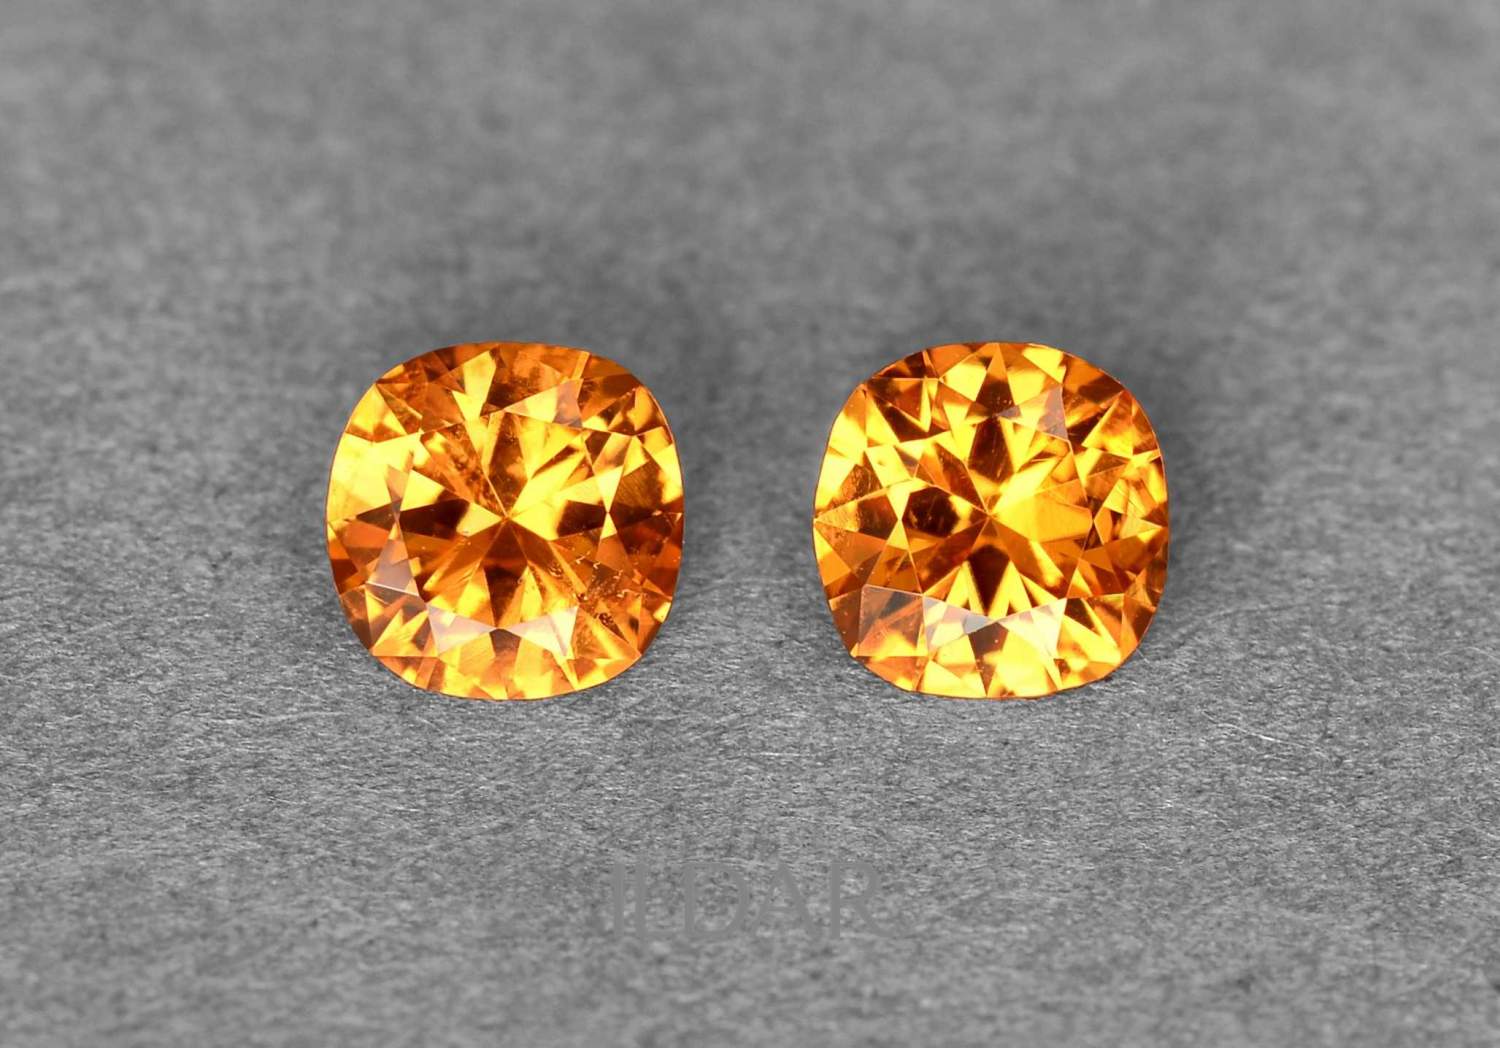 Pair of cushion shaped spessartines 1.82 ct order